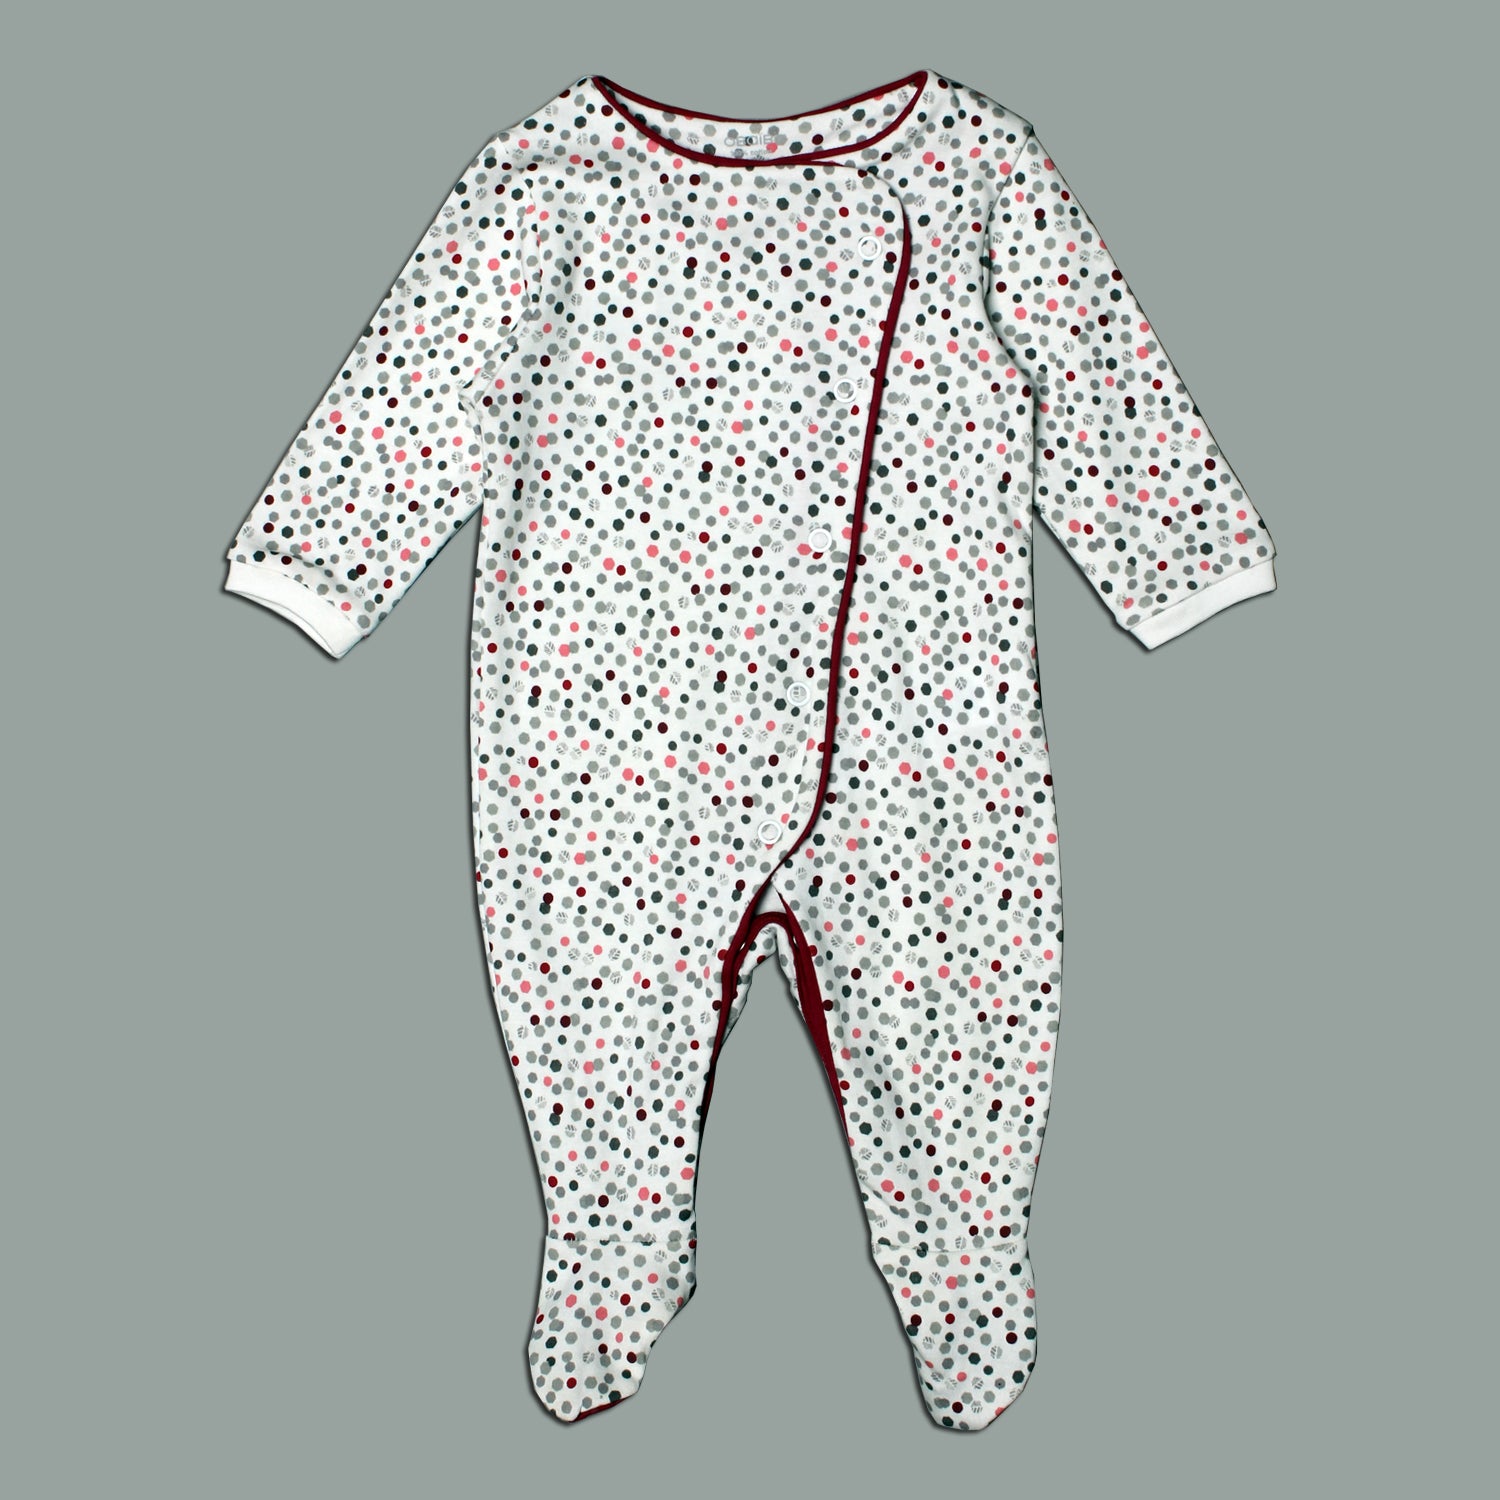 WHITE WITH GREY & PINK DOTS FULL BODY FULL SLEEVES ROMPERS